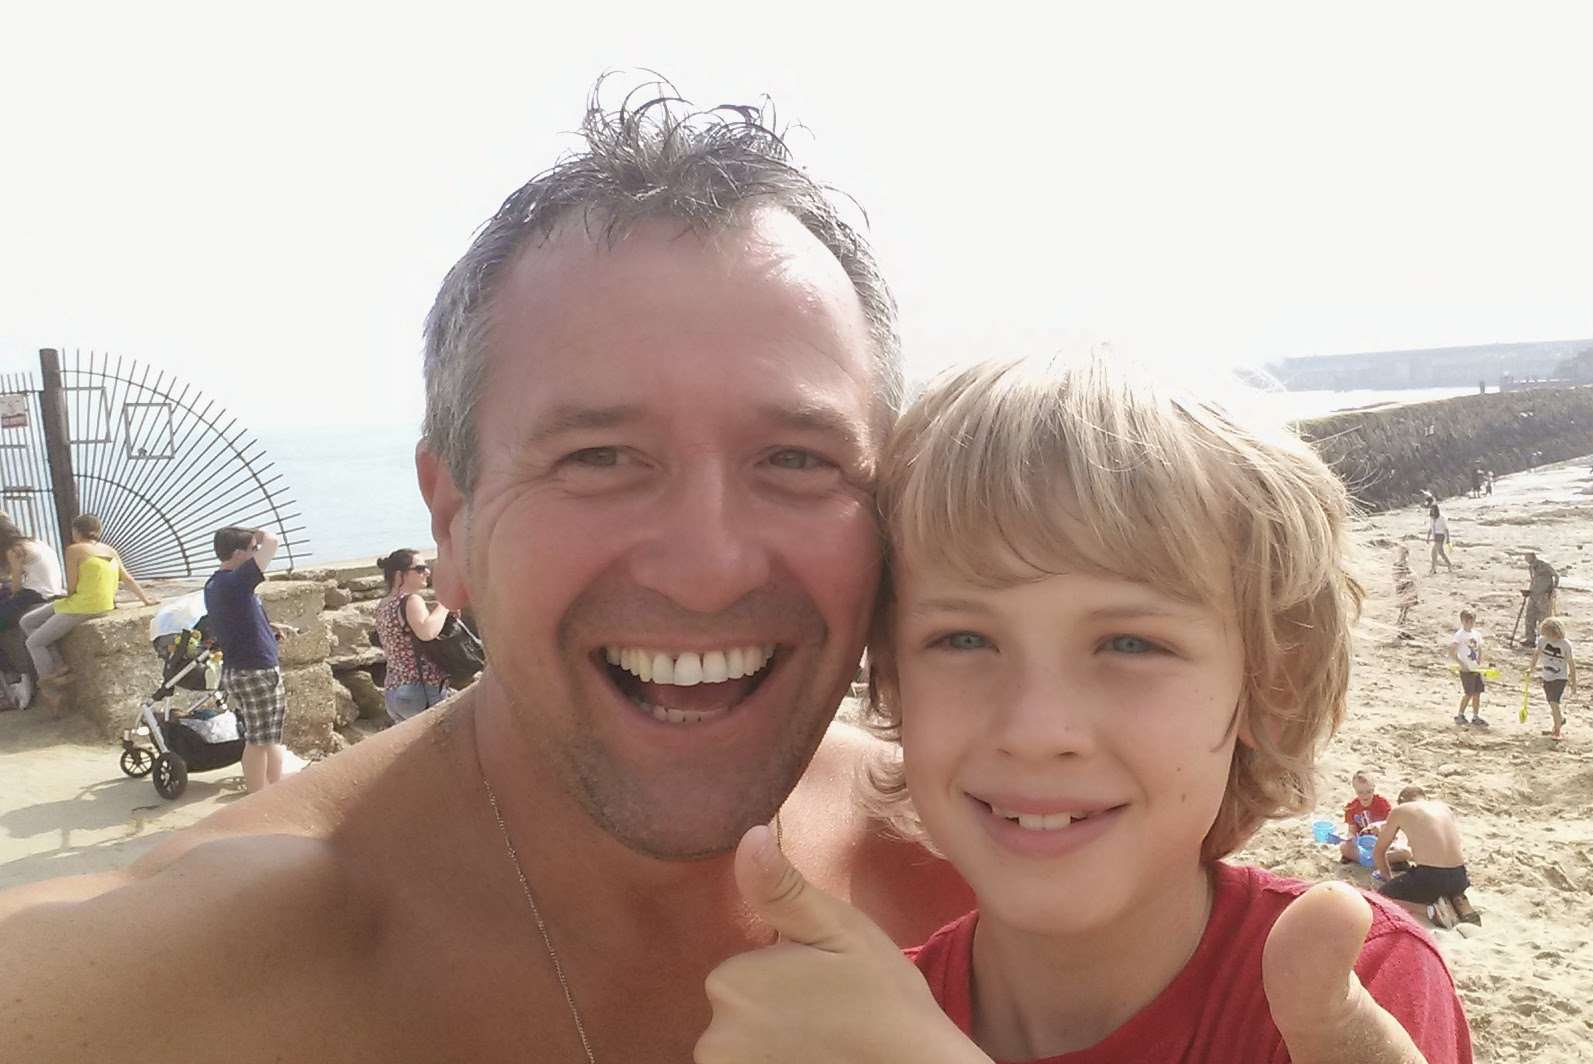 The excited pair after finding the gold bar at Folkestone beach